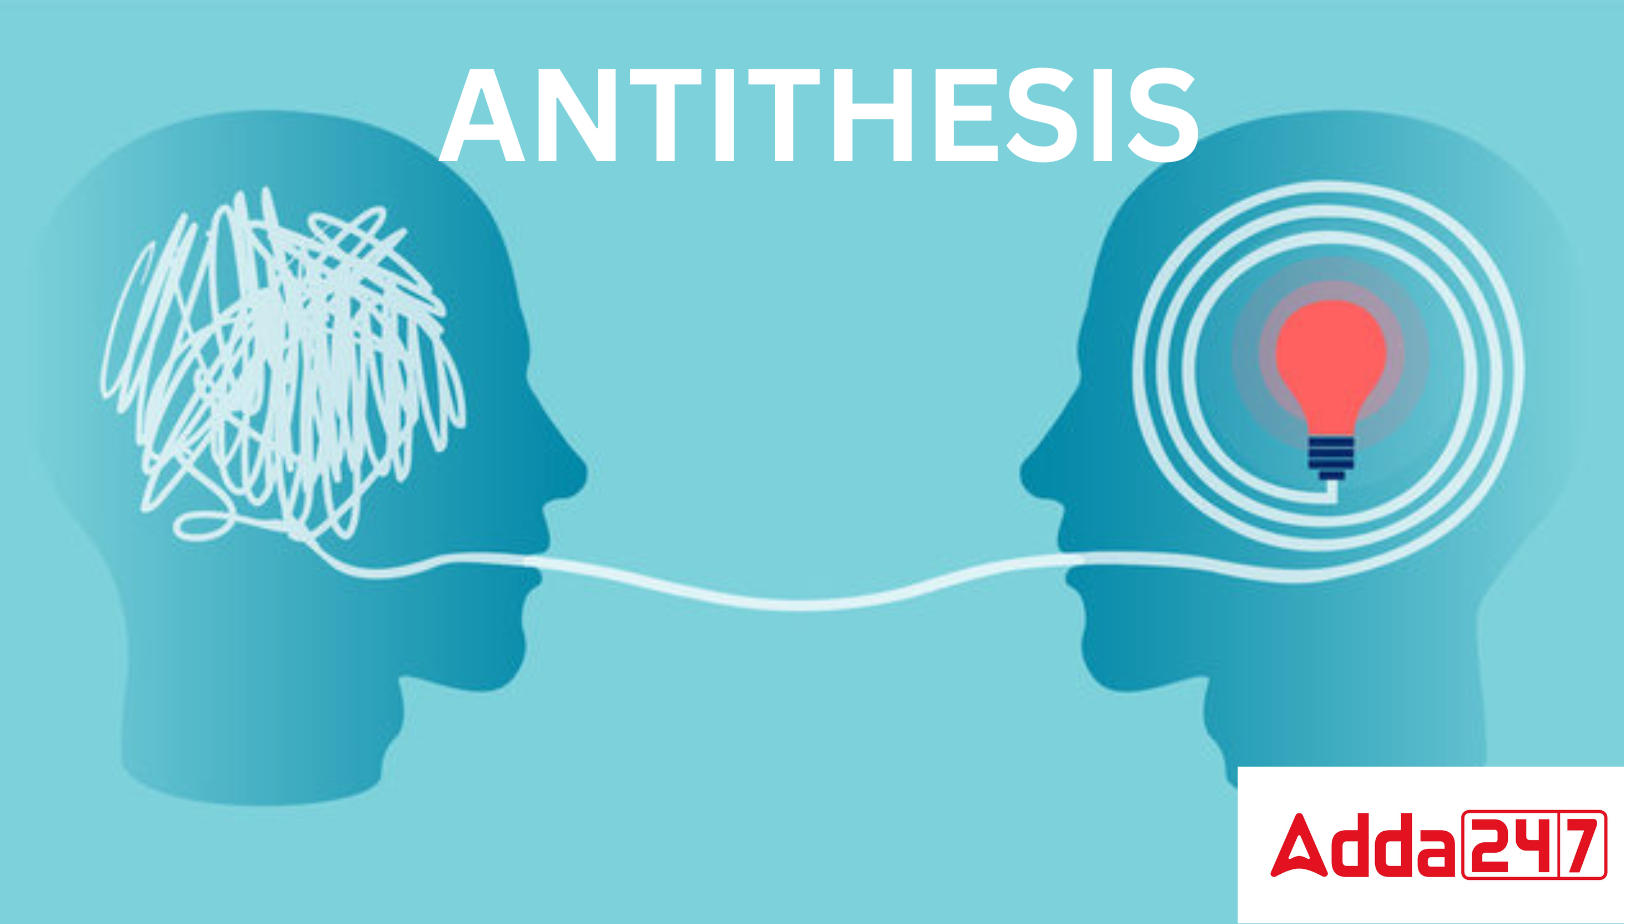 antithesis meaning essay